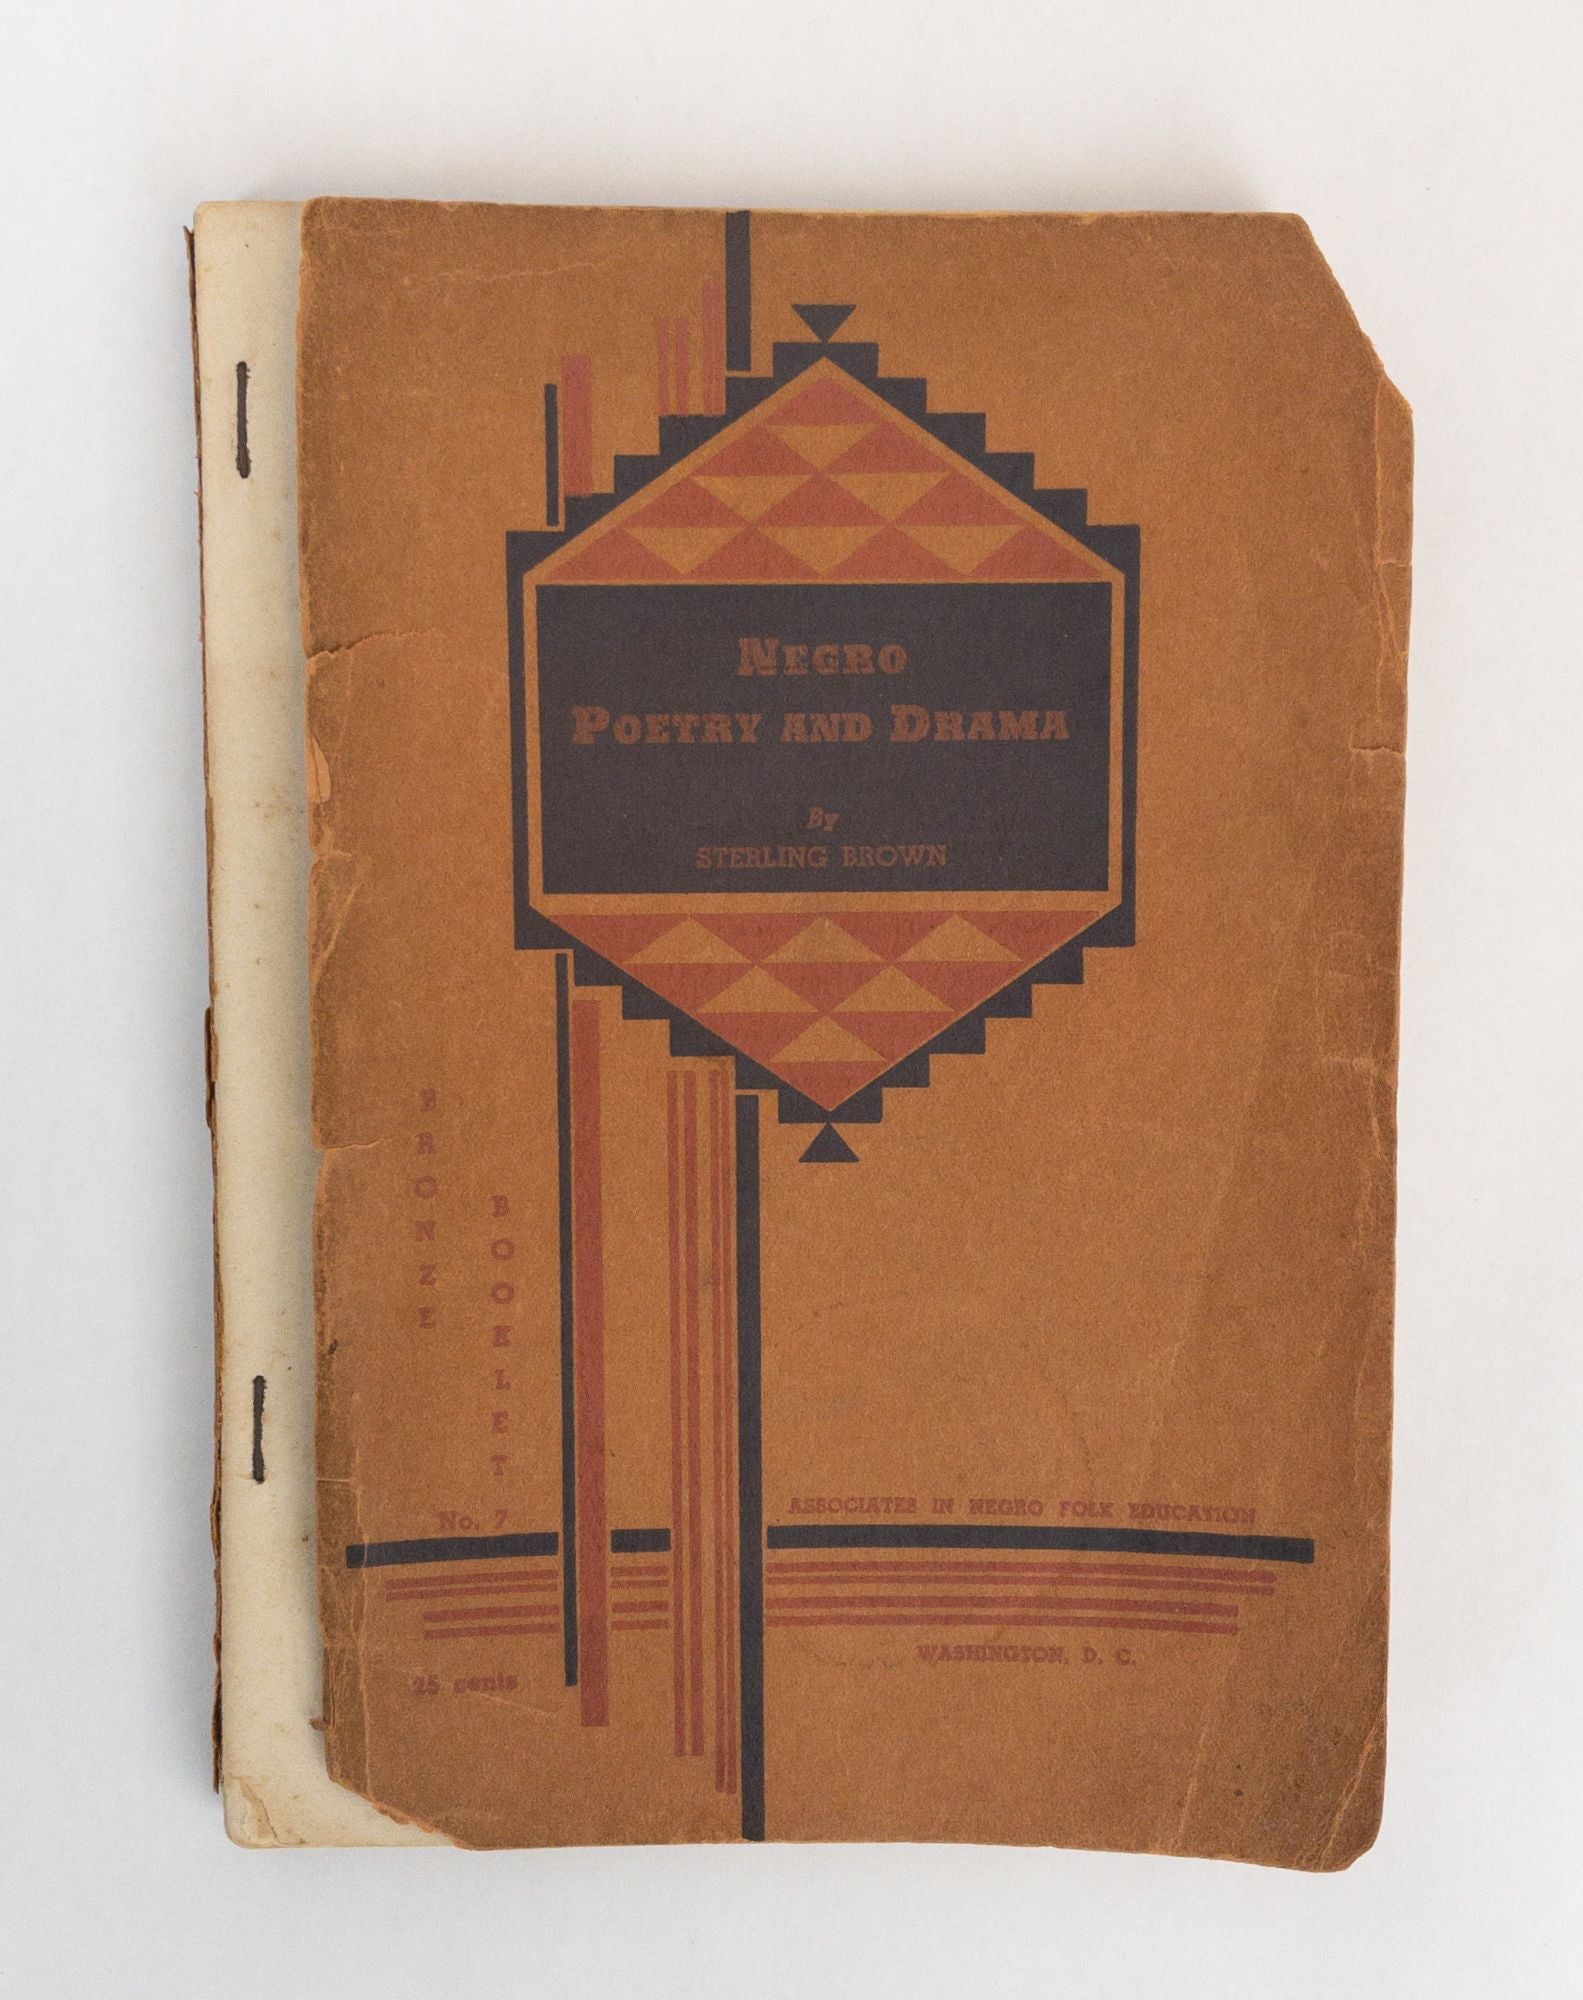 Product Image for THE NEGRO IN AMERICAN FICTION; [With] NEGRO POETRY AND DRAMA [Two Volumes] [Signed]